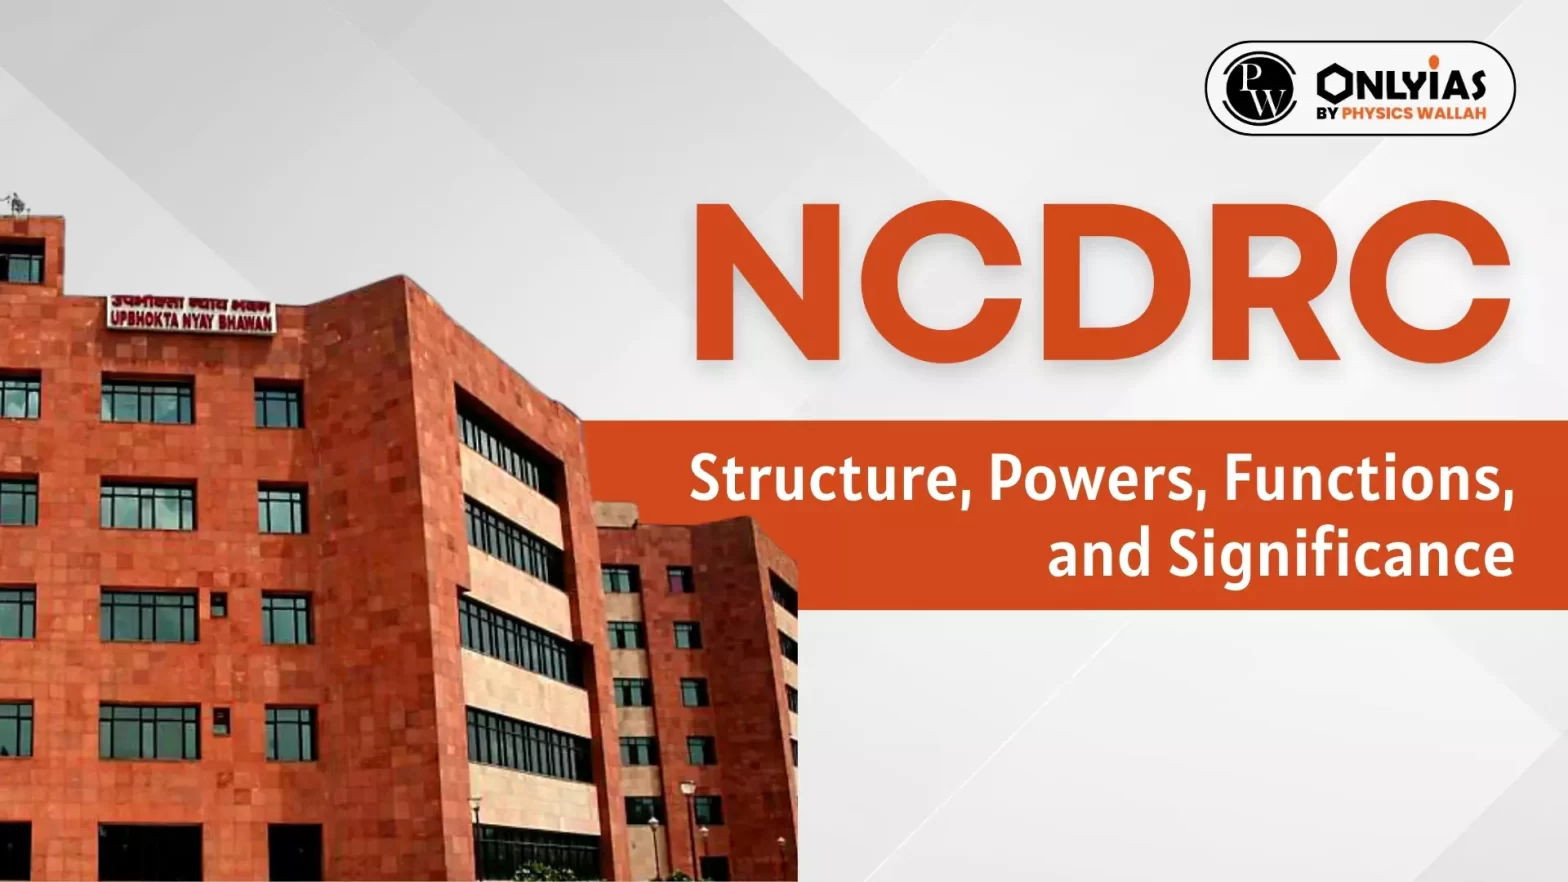 NCDRC: Structure, Powers, Functions, and Significance